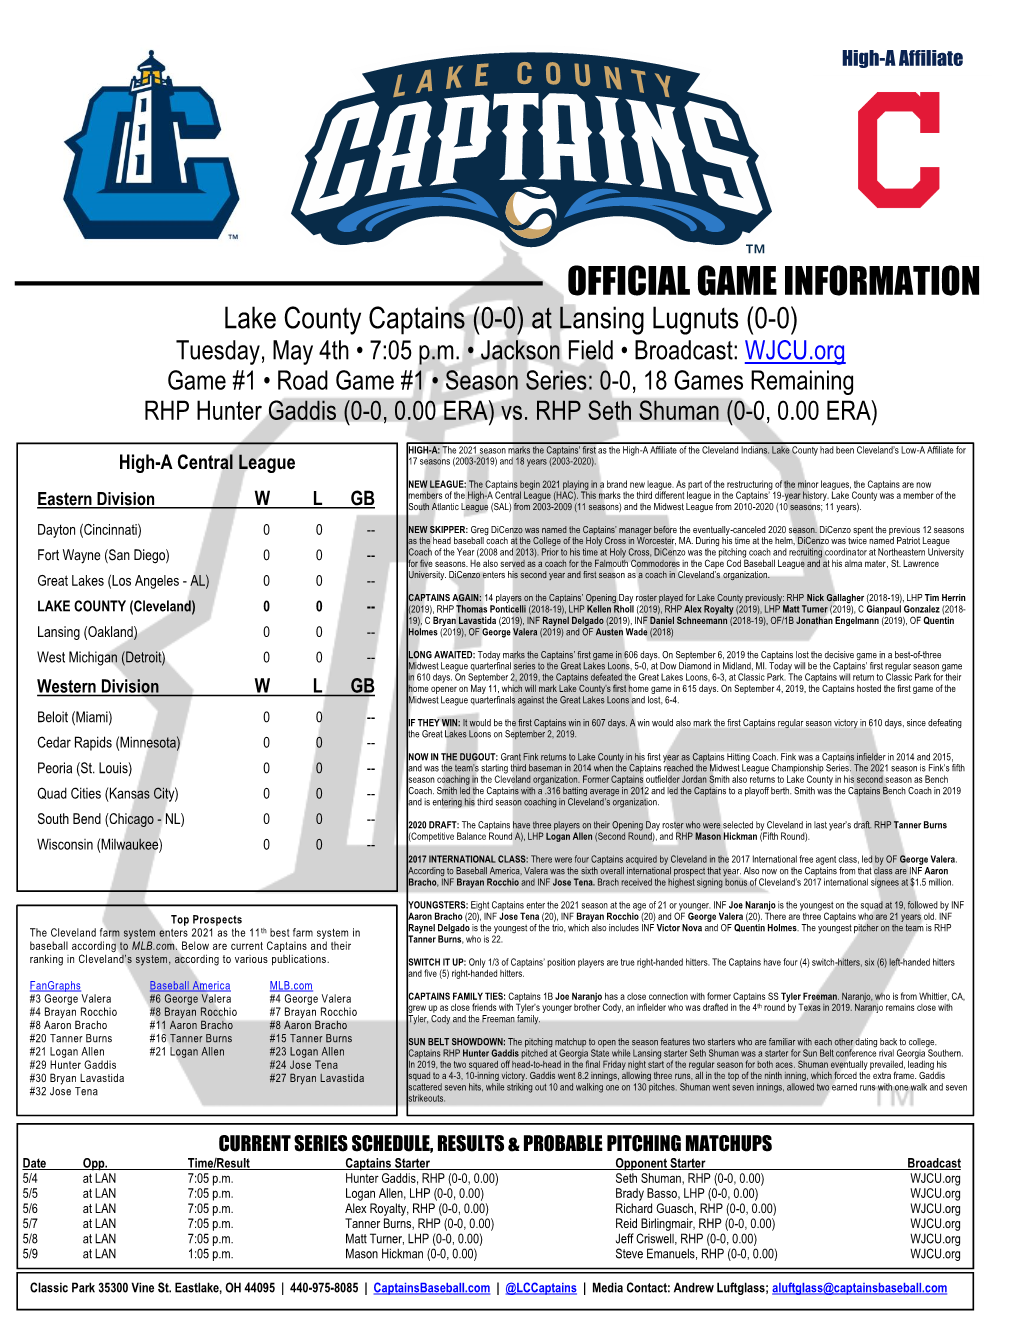 OFFICIAL GAME INFORMATION Lake County Captains (0-0) at Lansing Lugnuts (0-0) Tuesday, May 4Th • 7:05 P.M